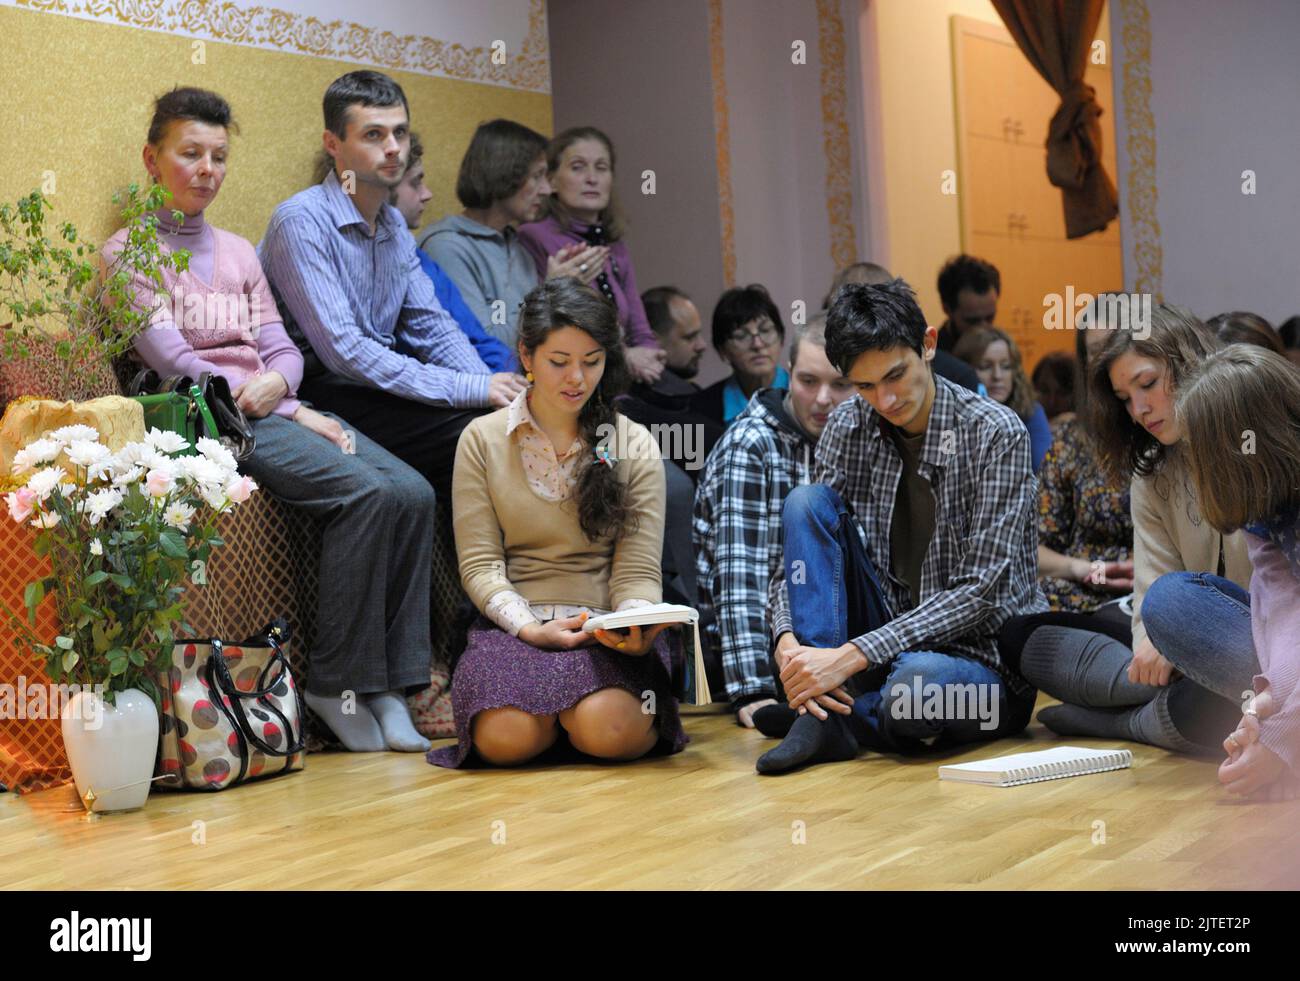 Krishna parishioners sitting on a floor and reading mantra from the book. April 3, 2013. Kyiv, Ukraine Stock Photo